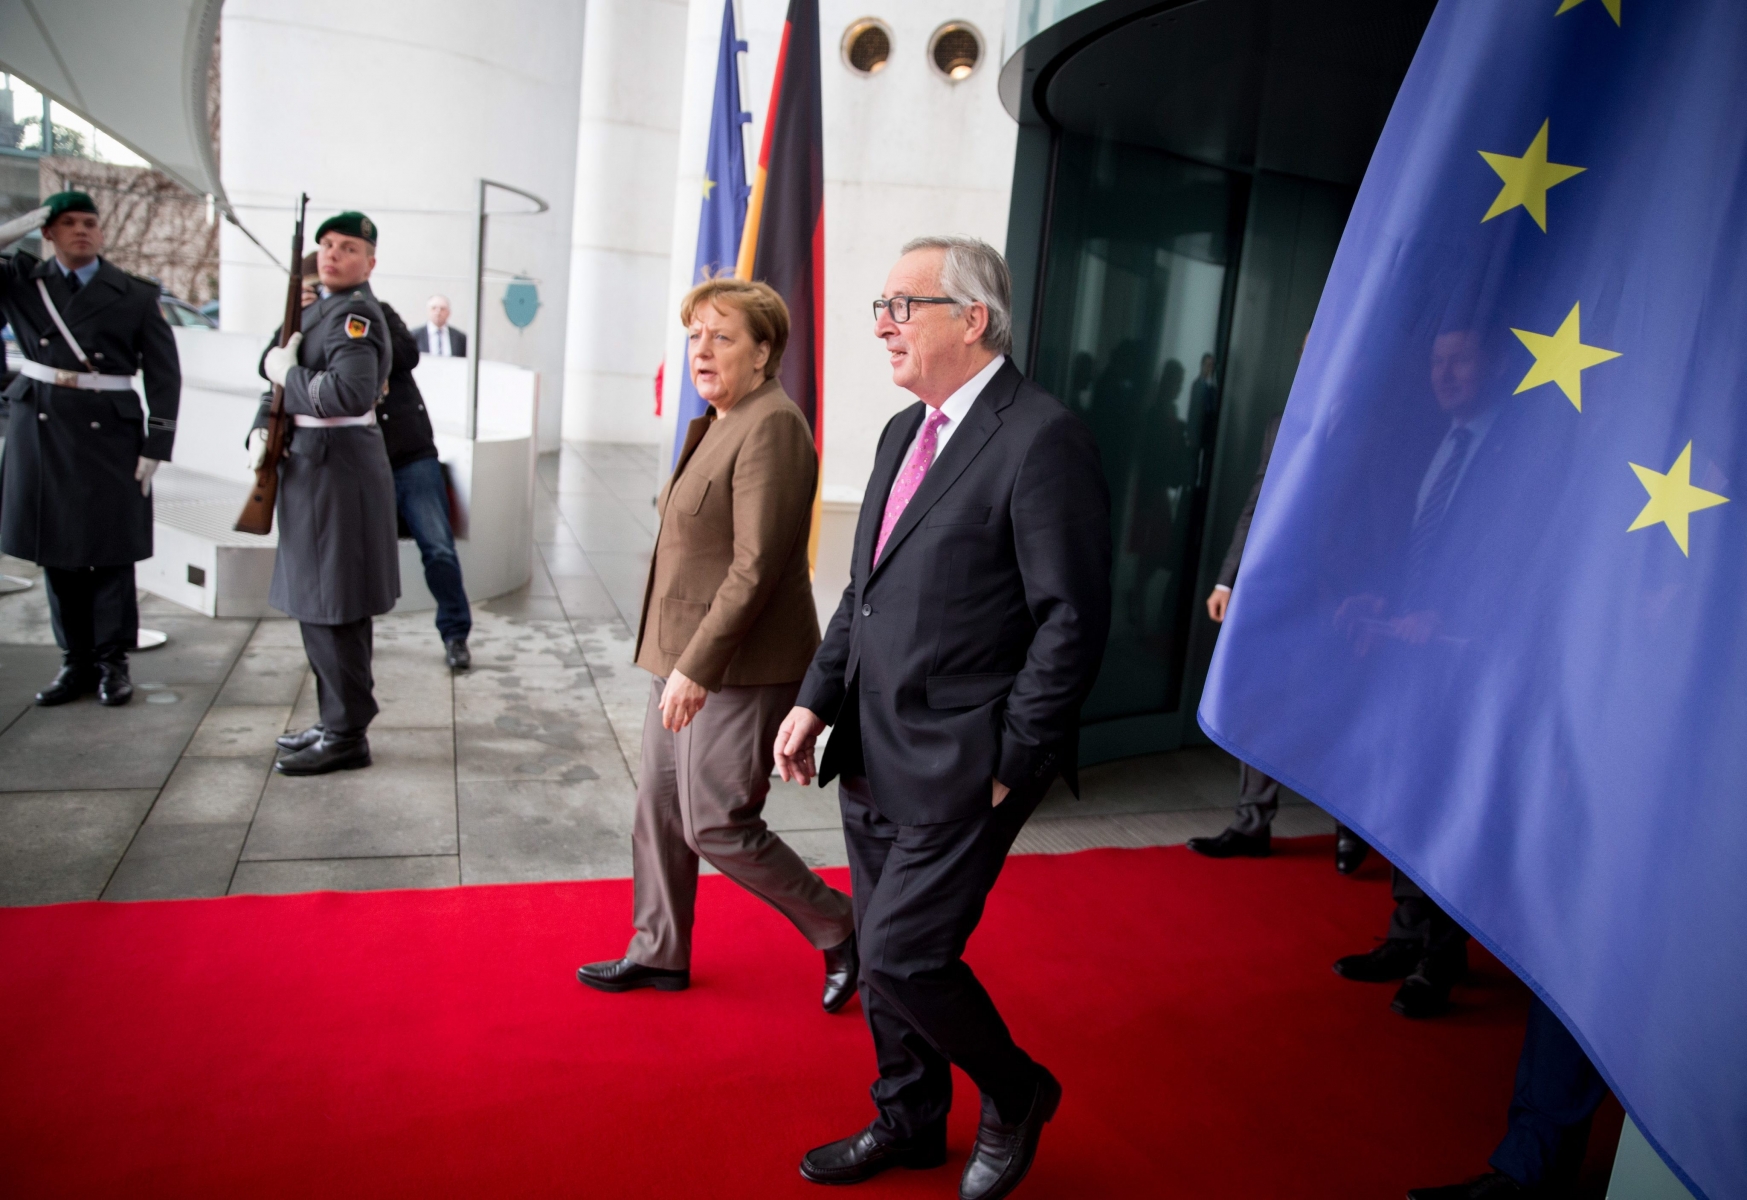 epa05101222 German Chancellor Angela Merkel (2-L) walks with President of the EU Commission, Jean-Claude Juncker (R), as he departs after his visit, in front of the Federal Chancellery in Berlin, Germany, 14 January 2016.  EPA/KAY NIETFELD GERMANY EU JUNCKER DIPLOMACY